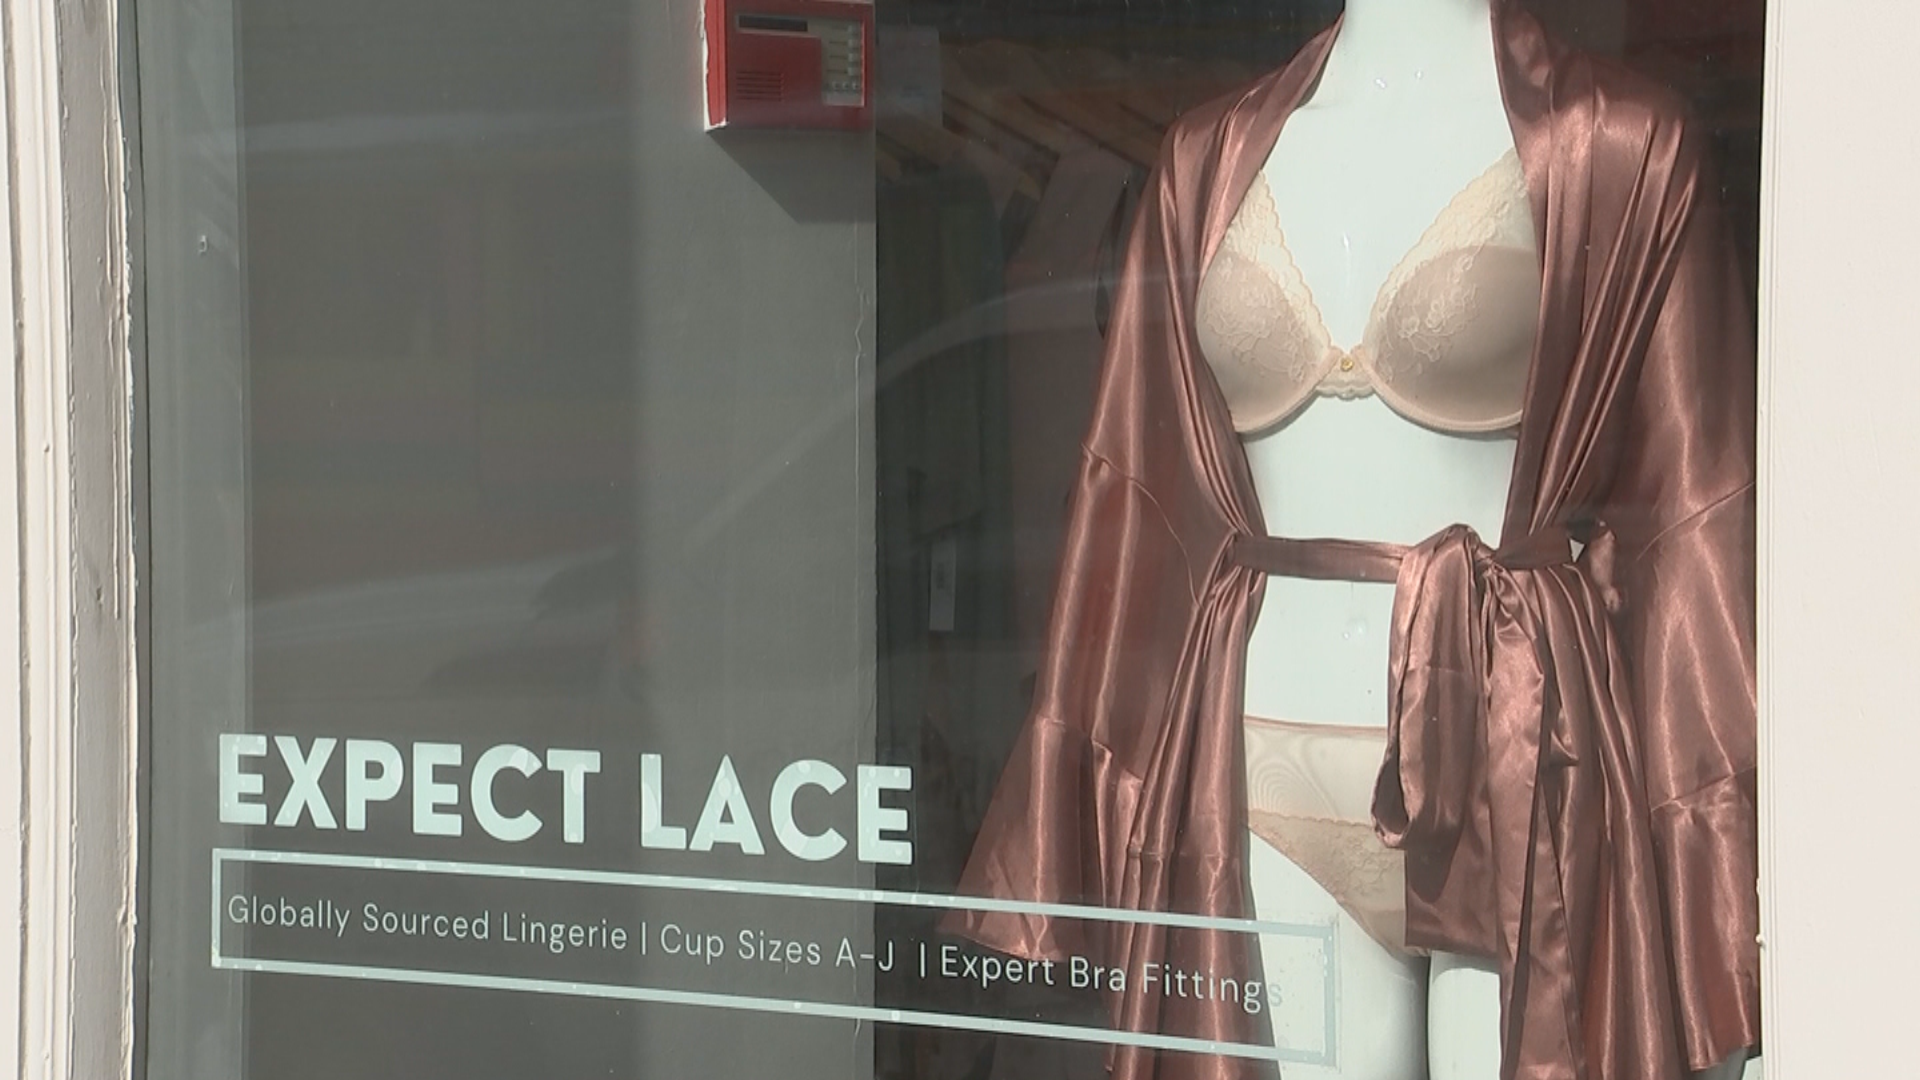 Expect Lace Manayunk Lingerie Shop Helping Women Feel Better Supported In More Ways Than pic